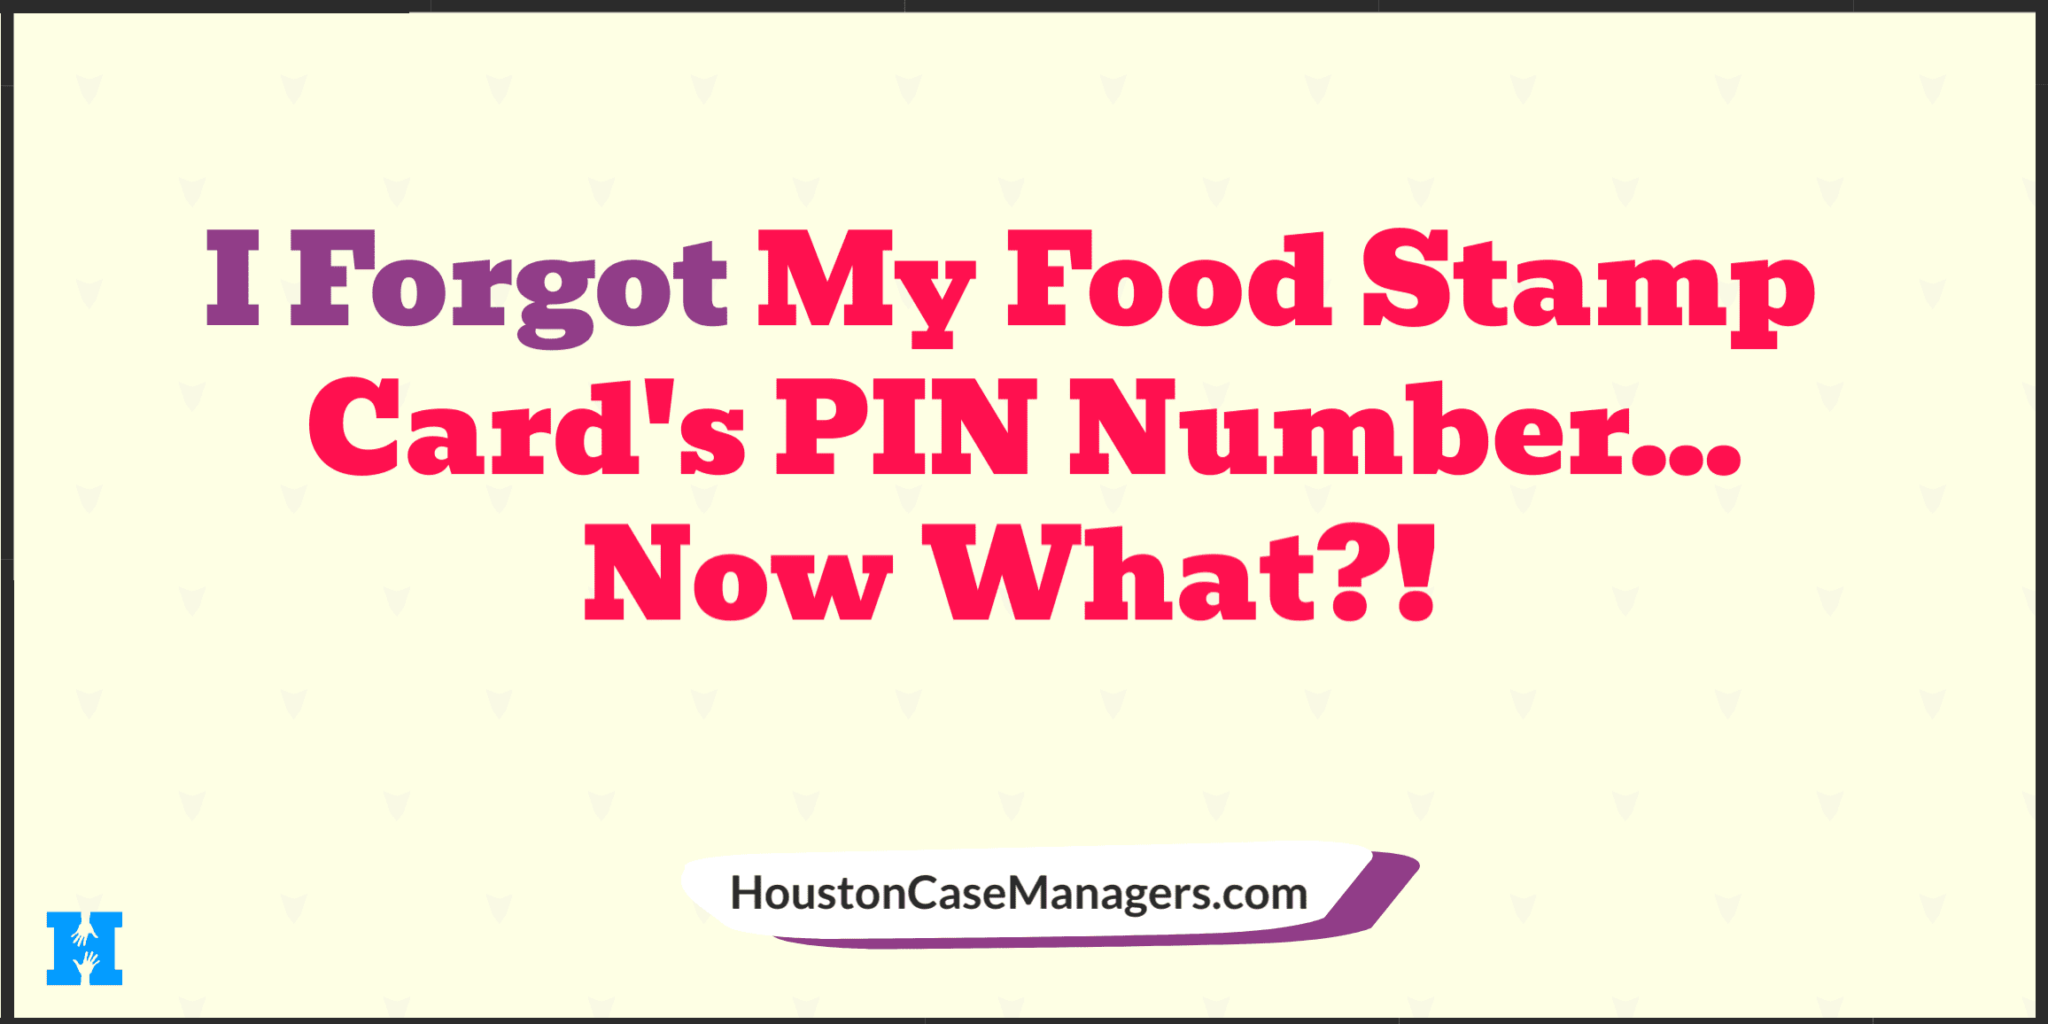 i-forgot-my-food-stamp-card-s-pin-number-now-what